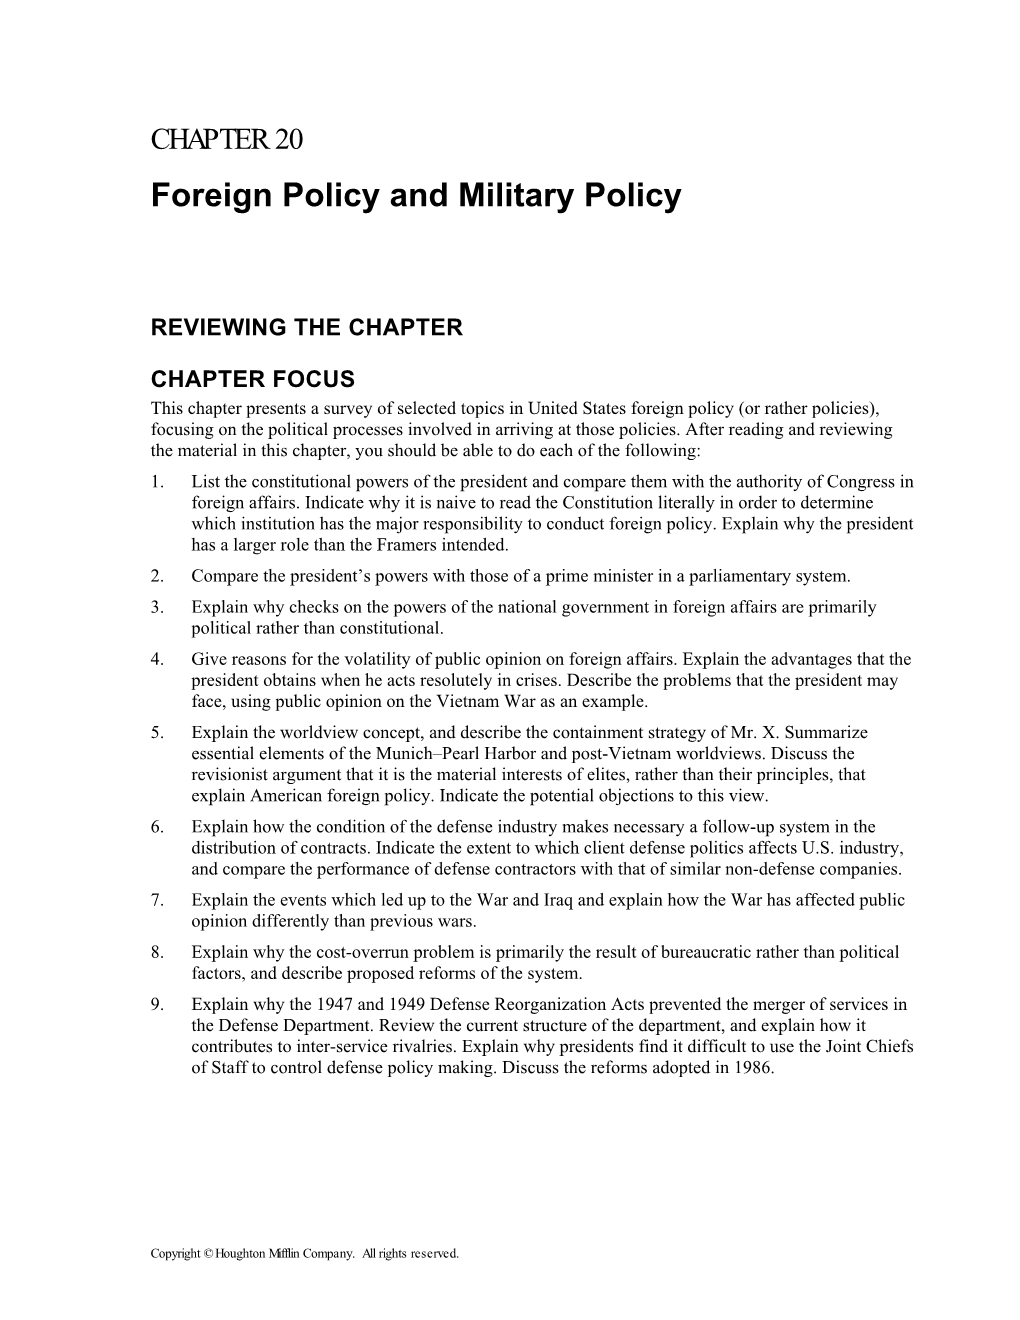 CHAPTER 20 Foreign Policy and Military Policy